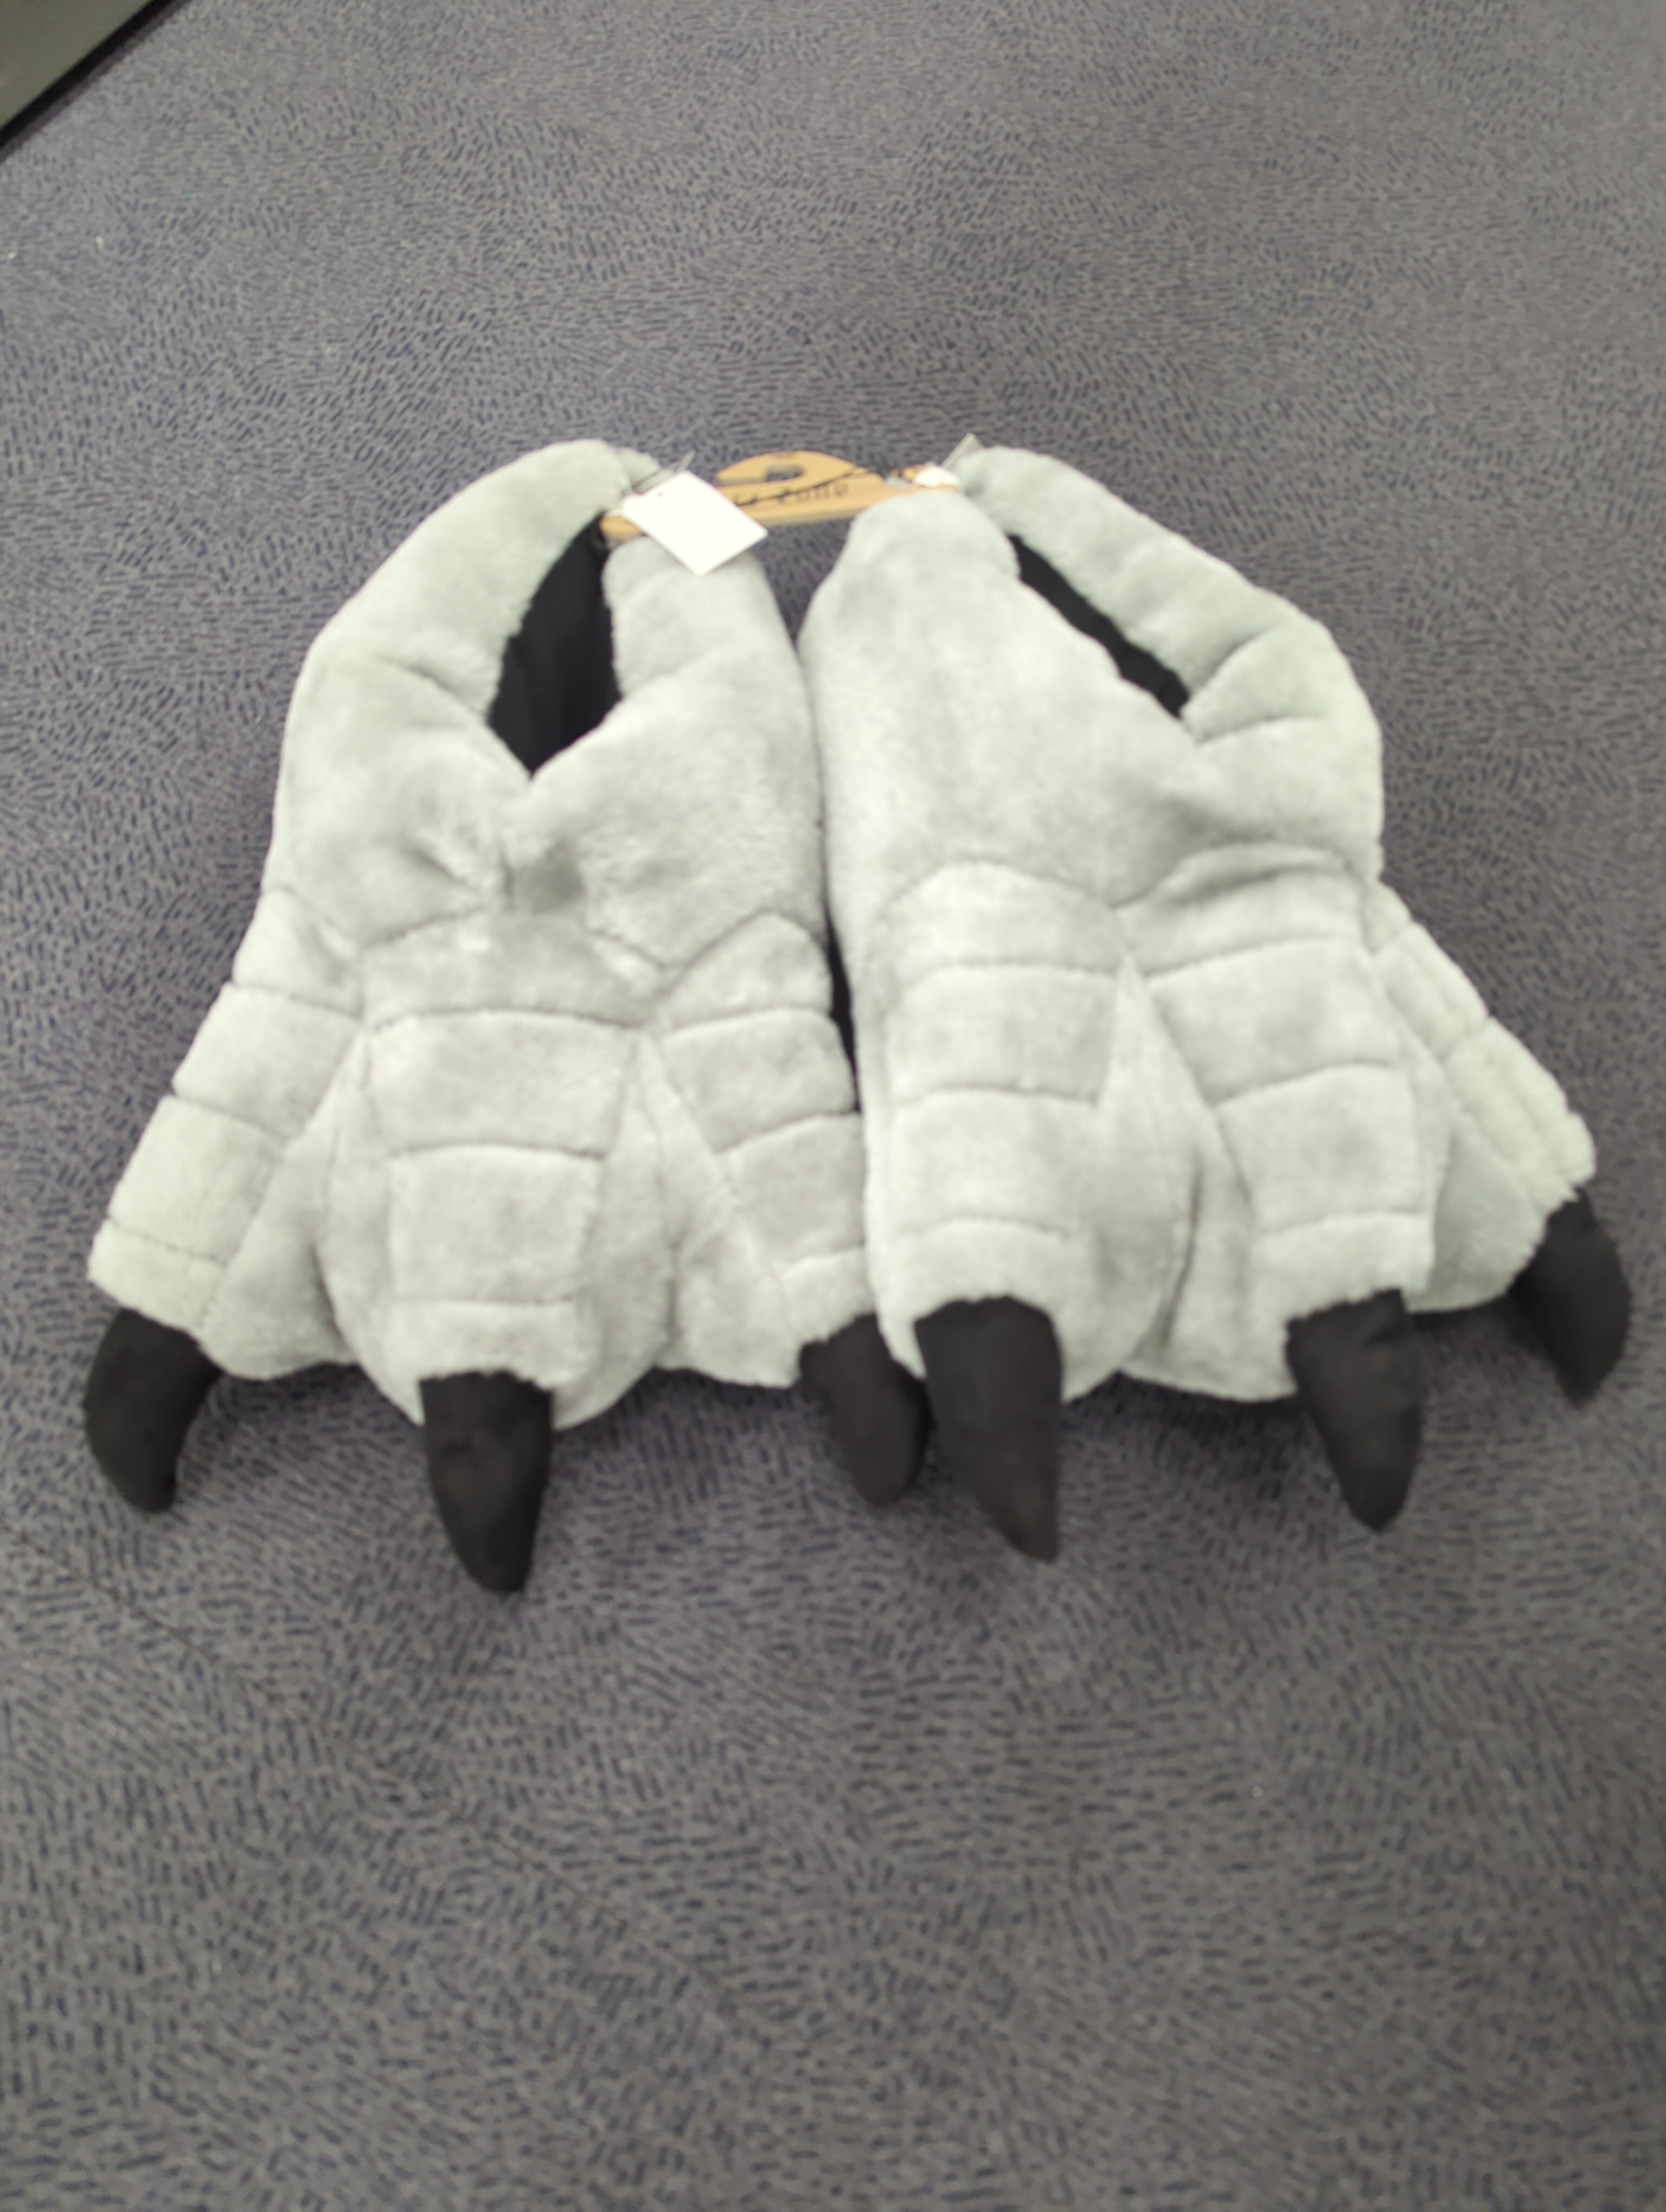 picture of slippers with big claws like dinosaur feet, grey